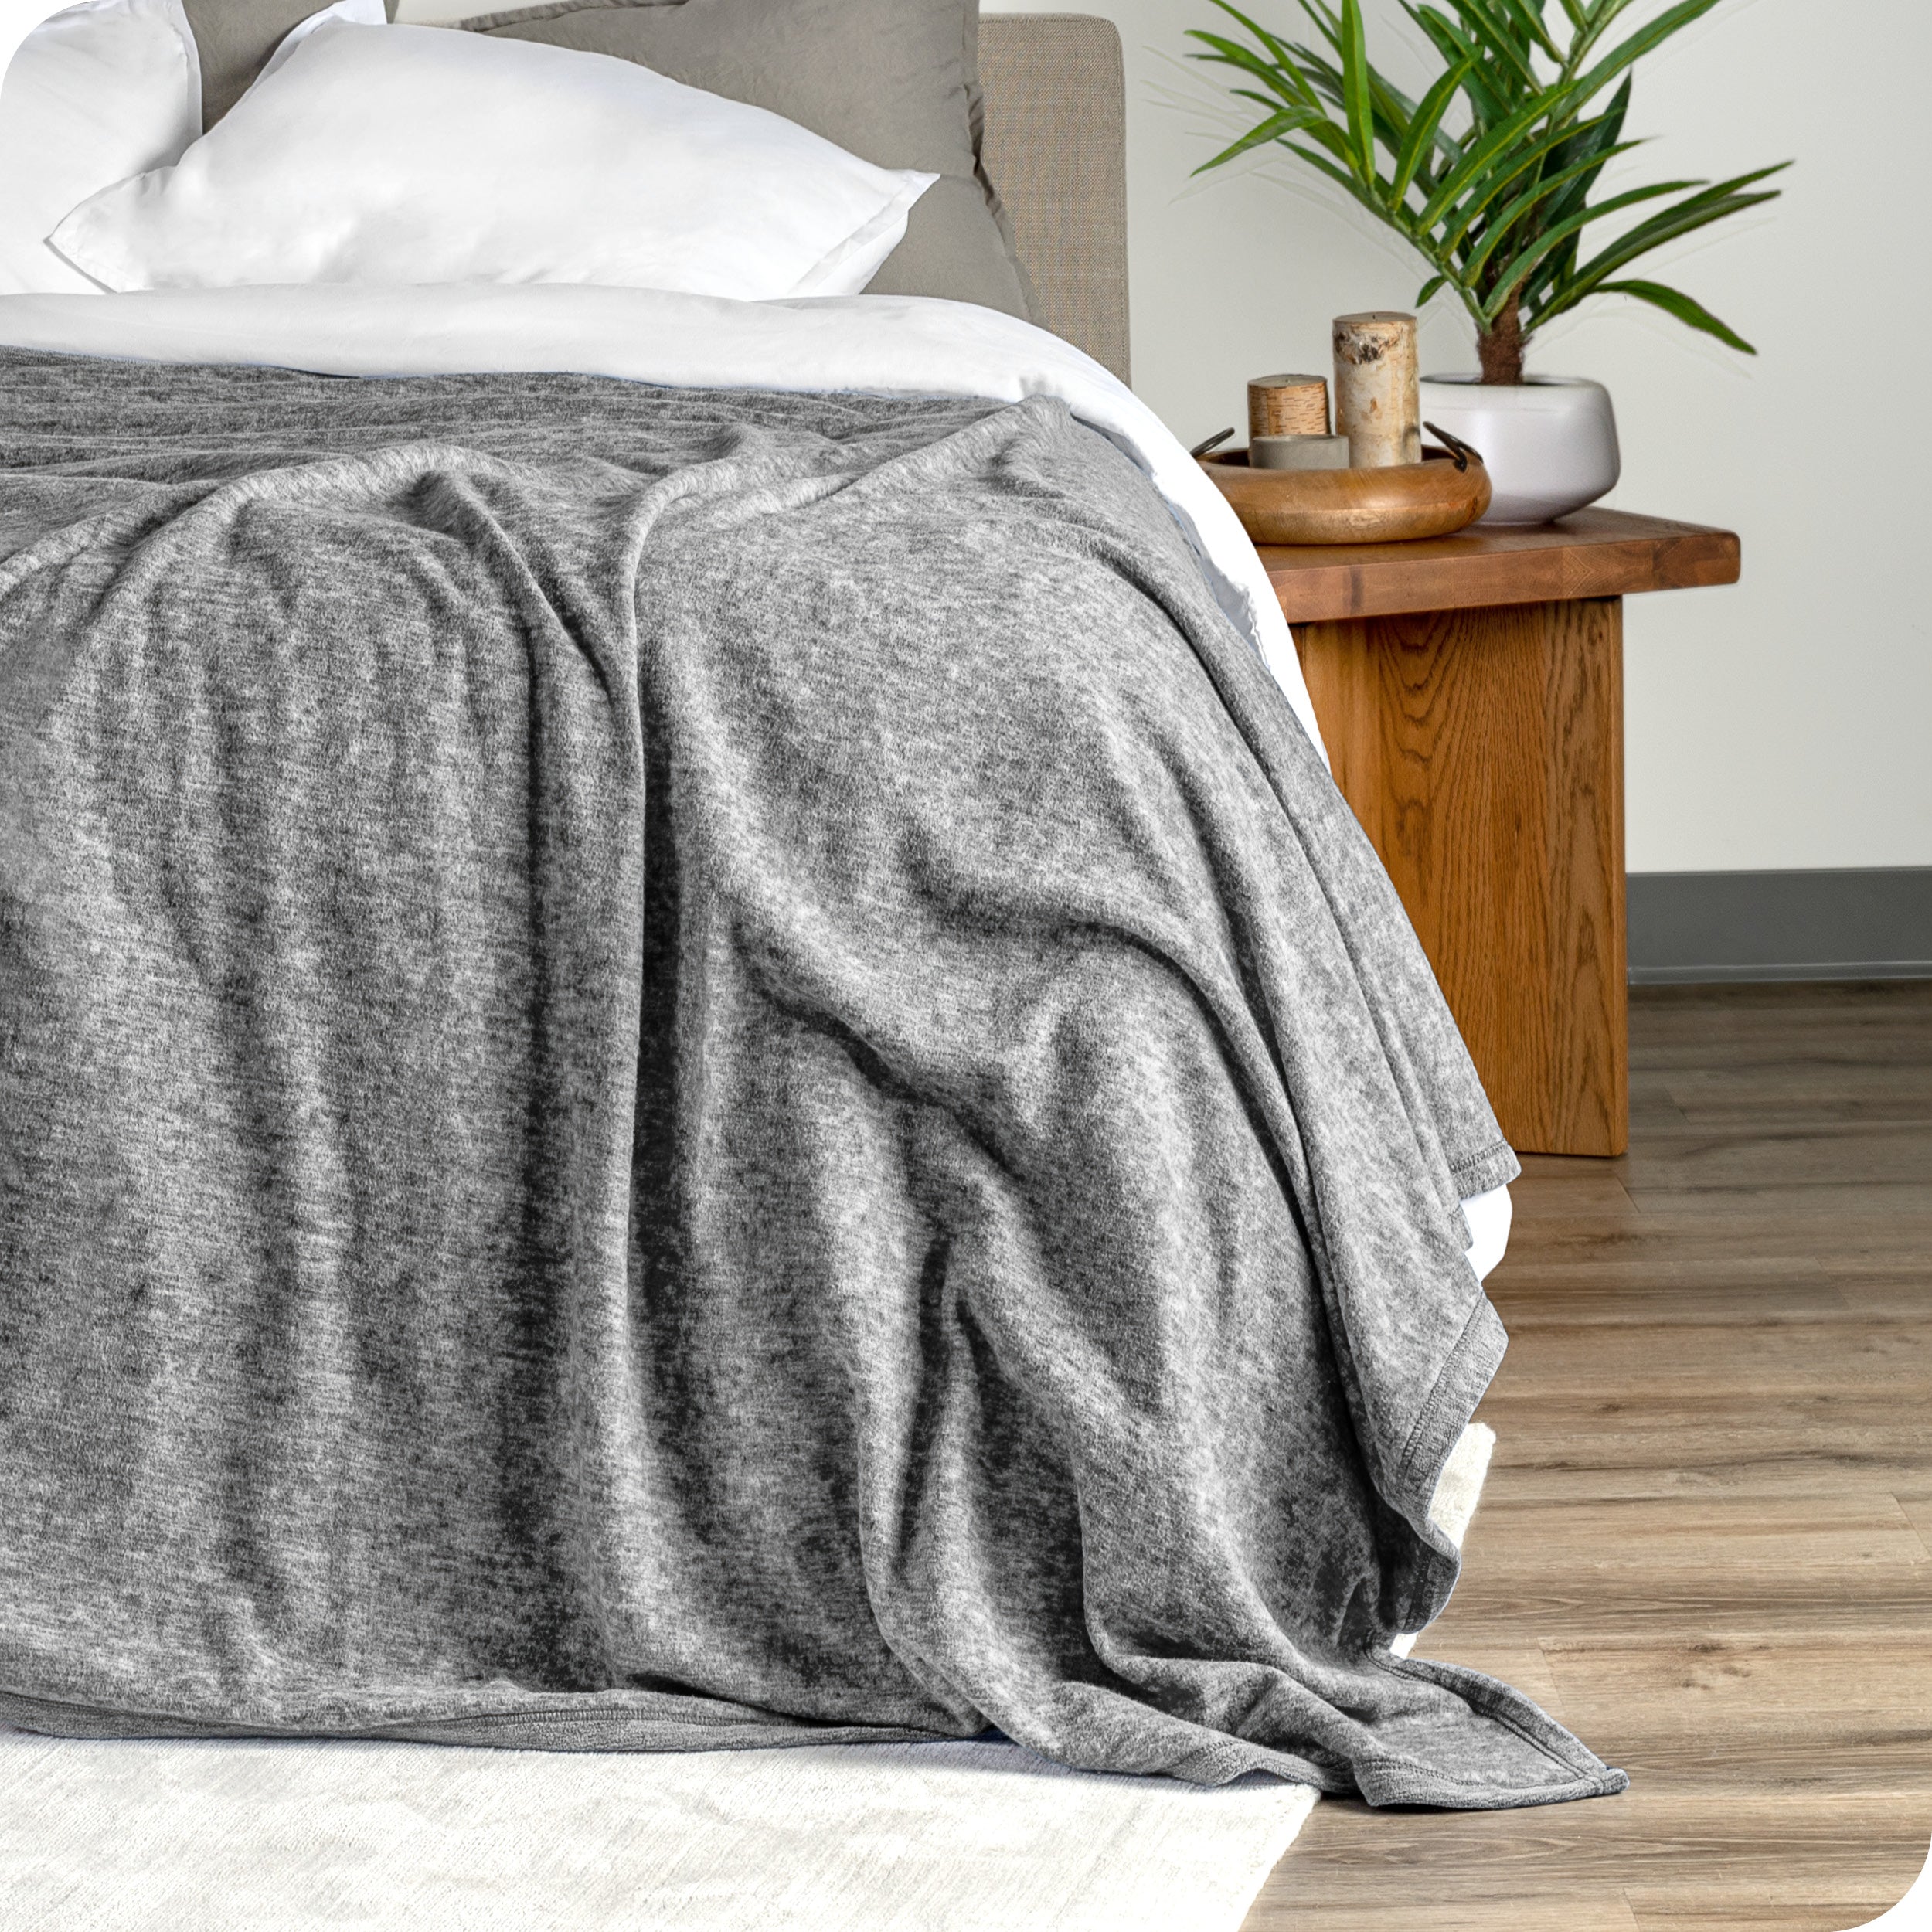 A polar fleece blanket drapped over the side and the end of a bed made with all white bedding